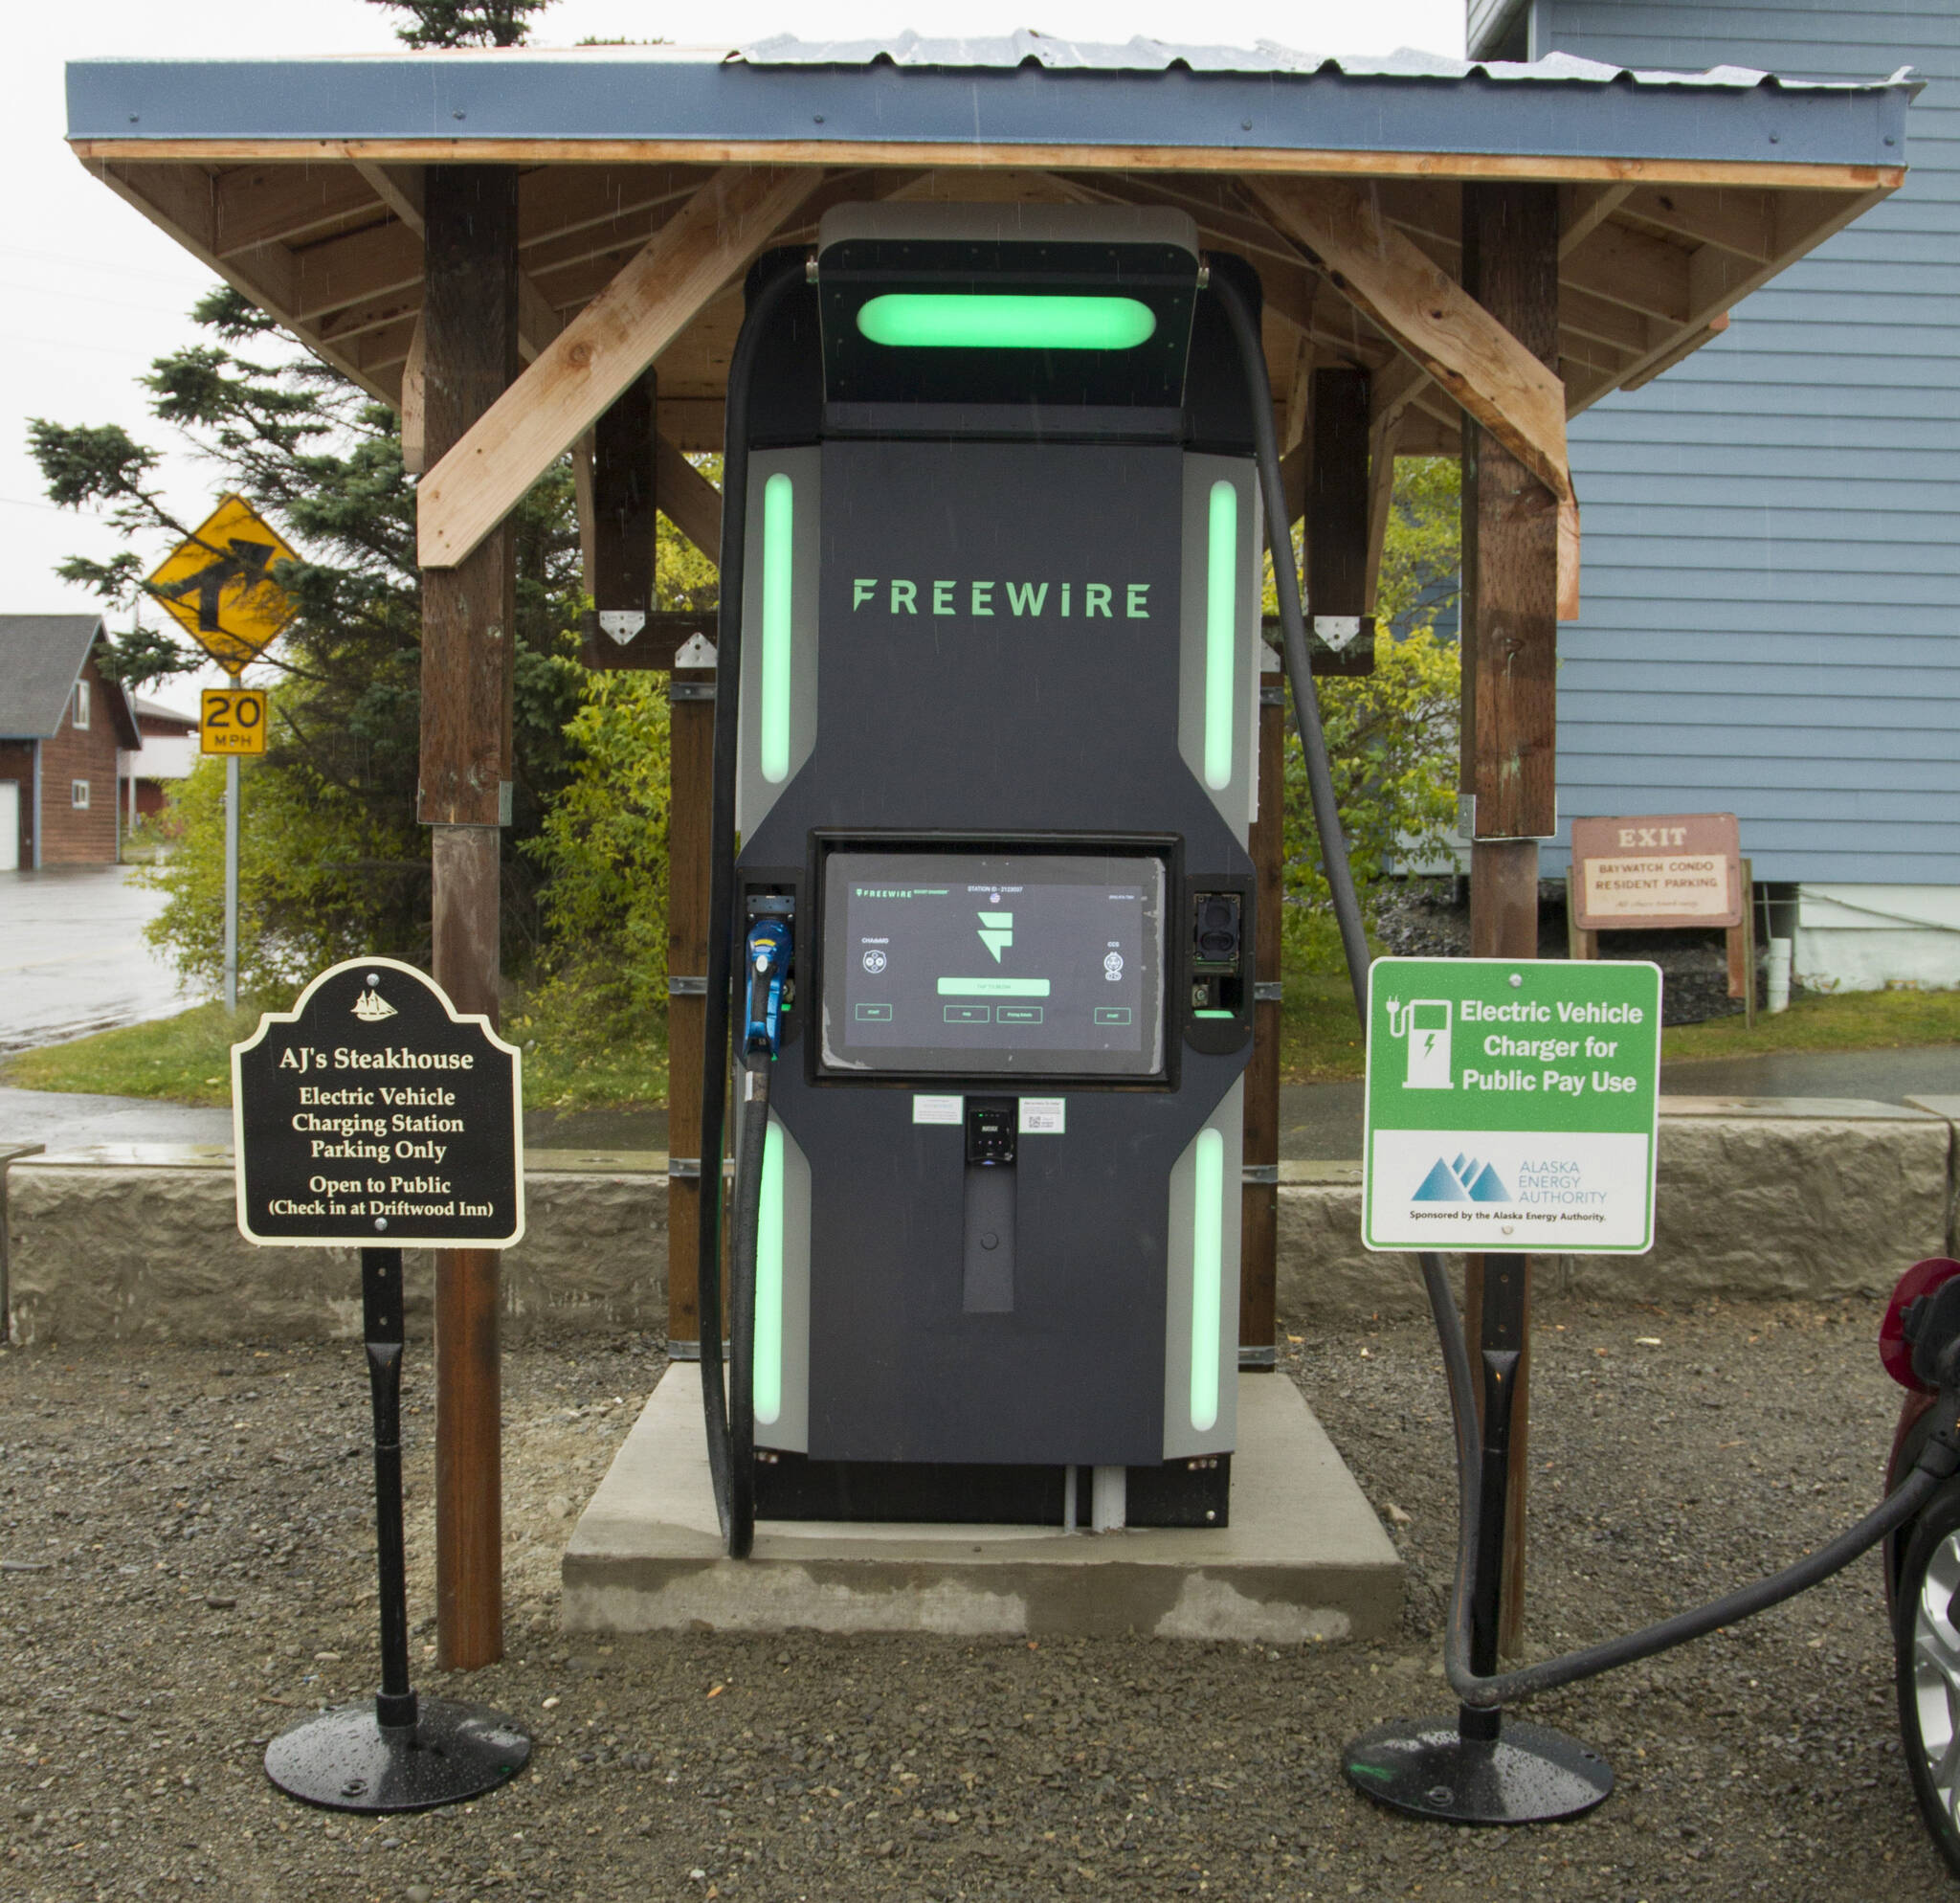 The FreeWire electric vehicle fast-charging station is located at AJ’s Steakhouse. (Photo by Sarah Knapp/Homer News)